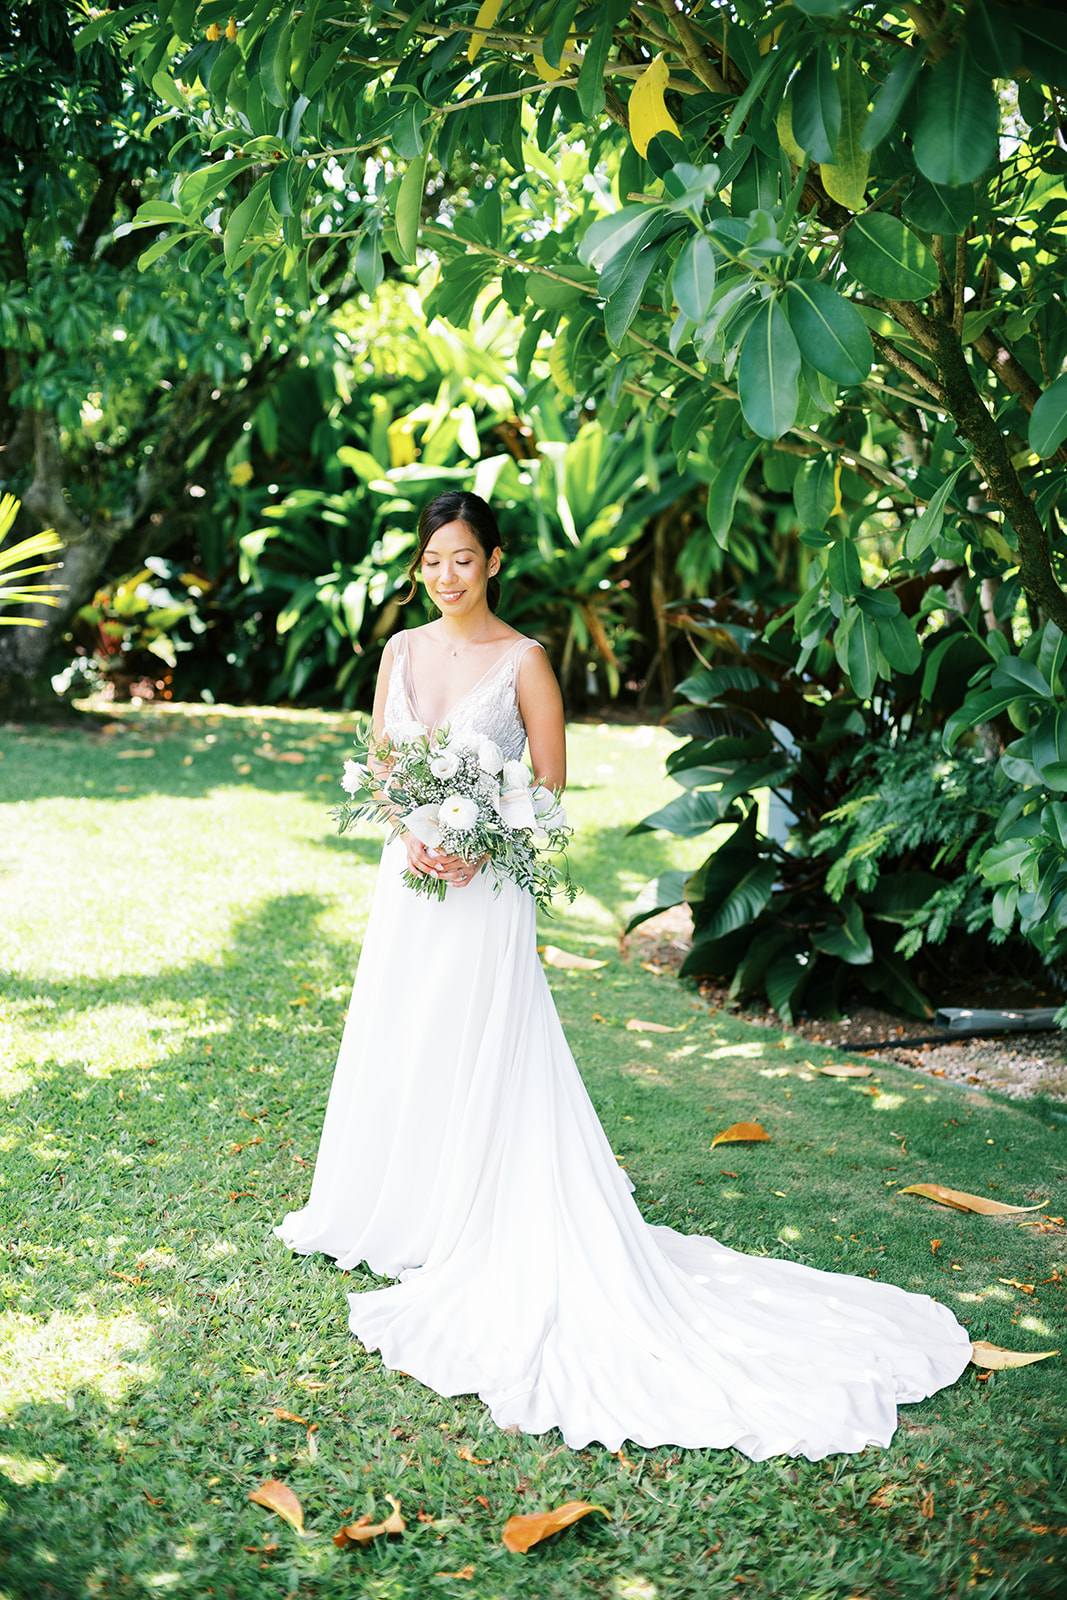 Bride standing in a garden, holding a bouquet captured by Oahu Wedding Photographer Megan Moura